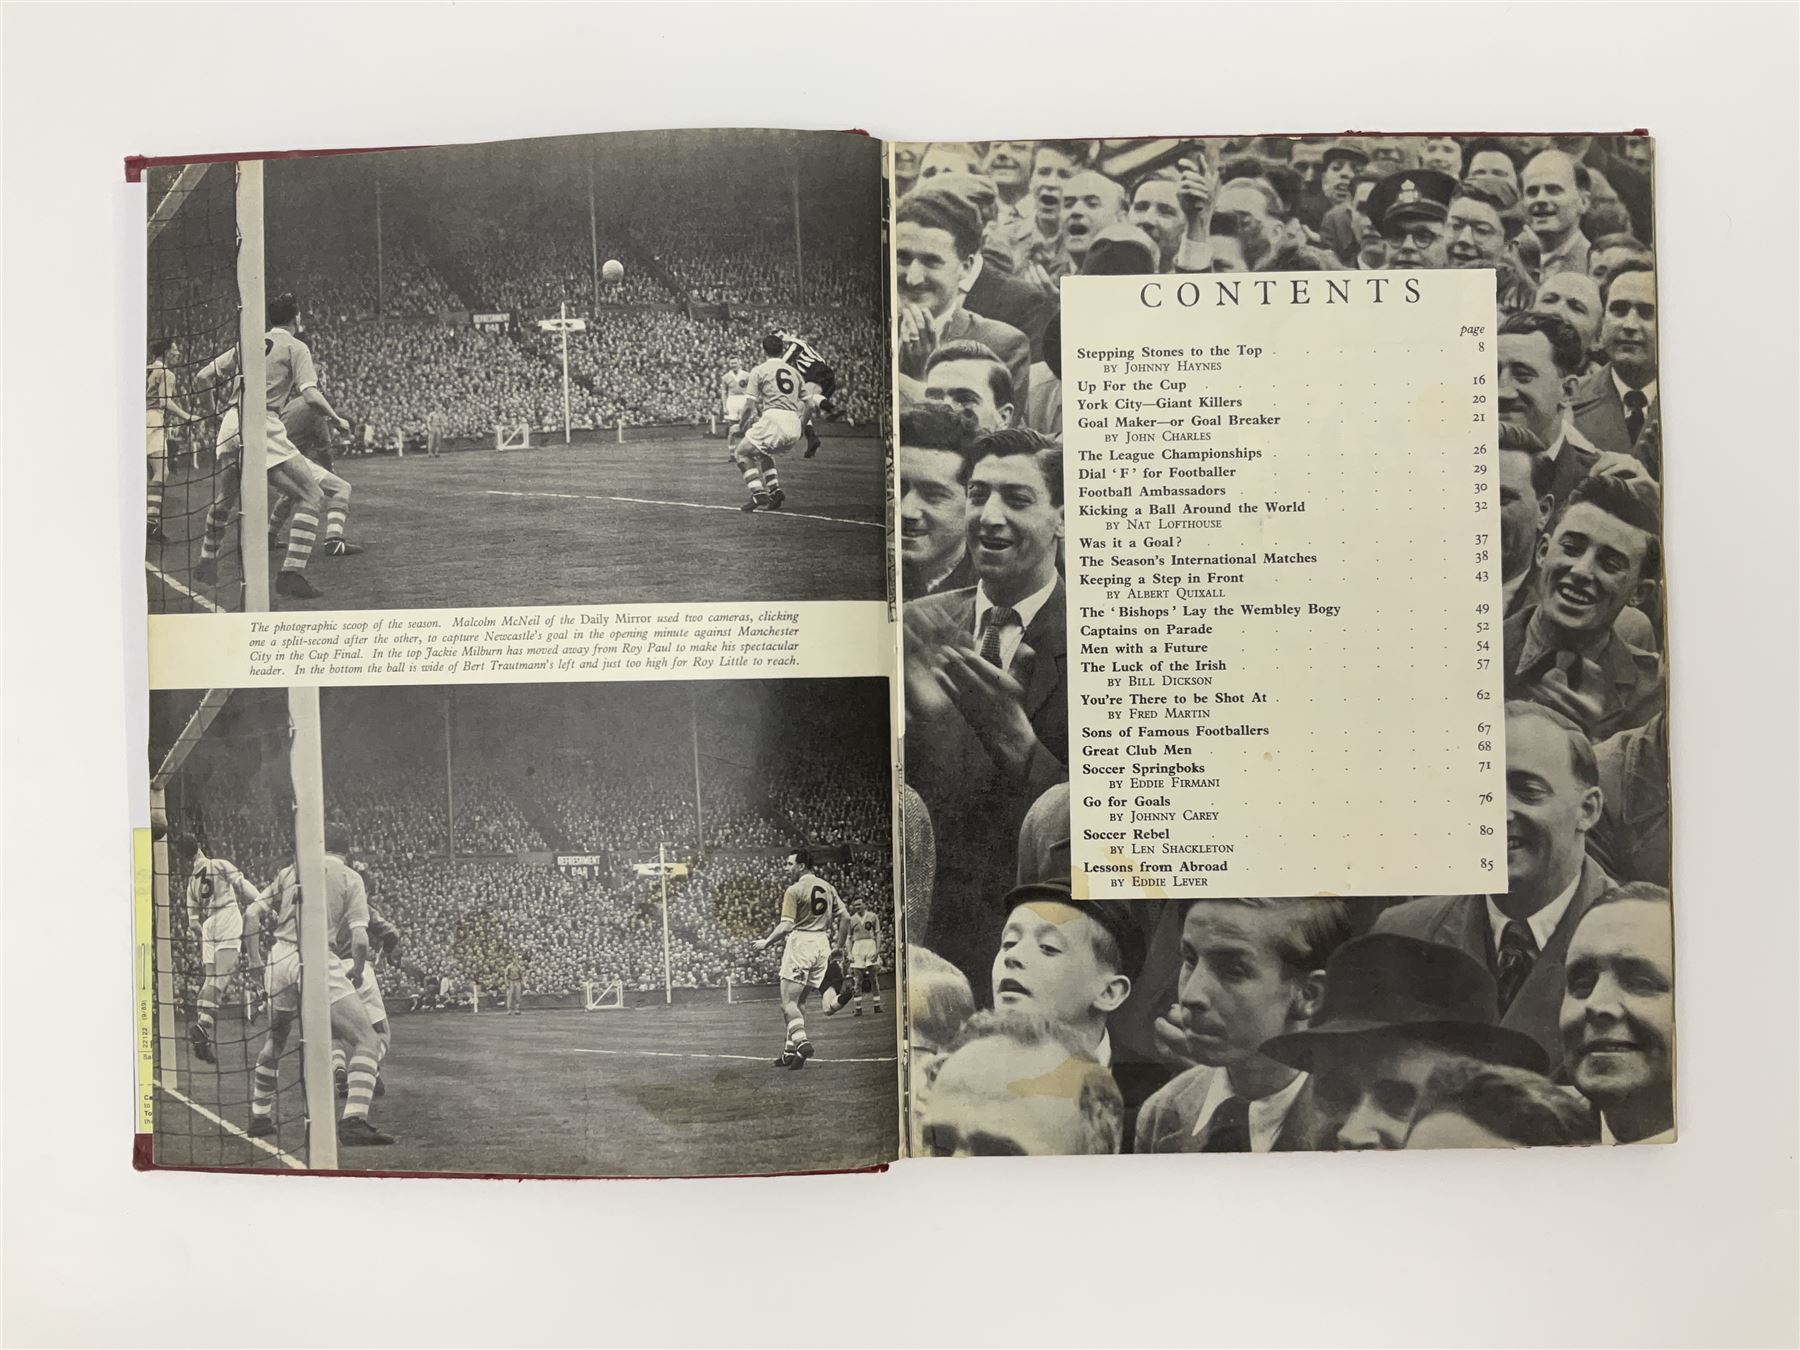 The Big Book of Football Champions by LTA Robinson Ltd - Image 3 of 7